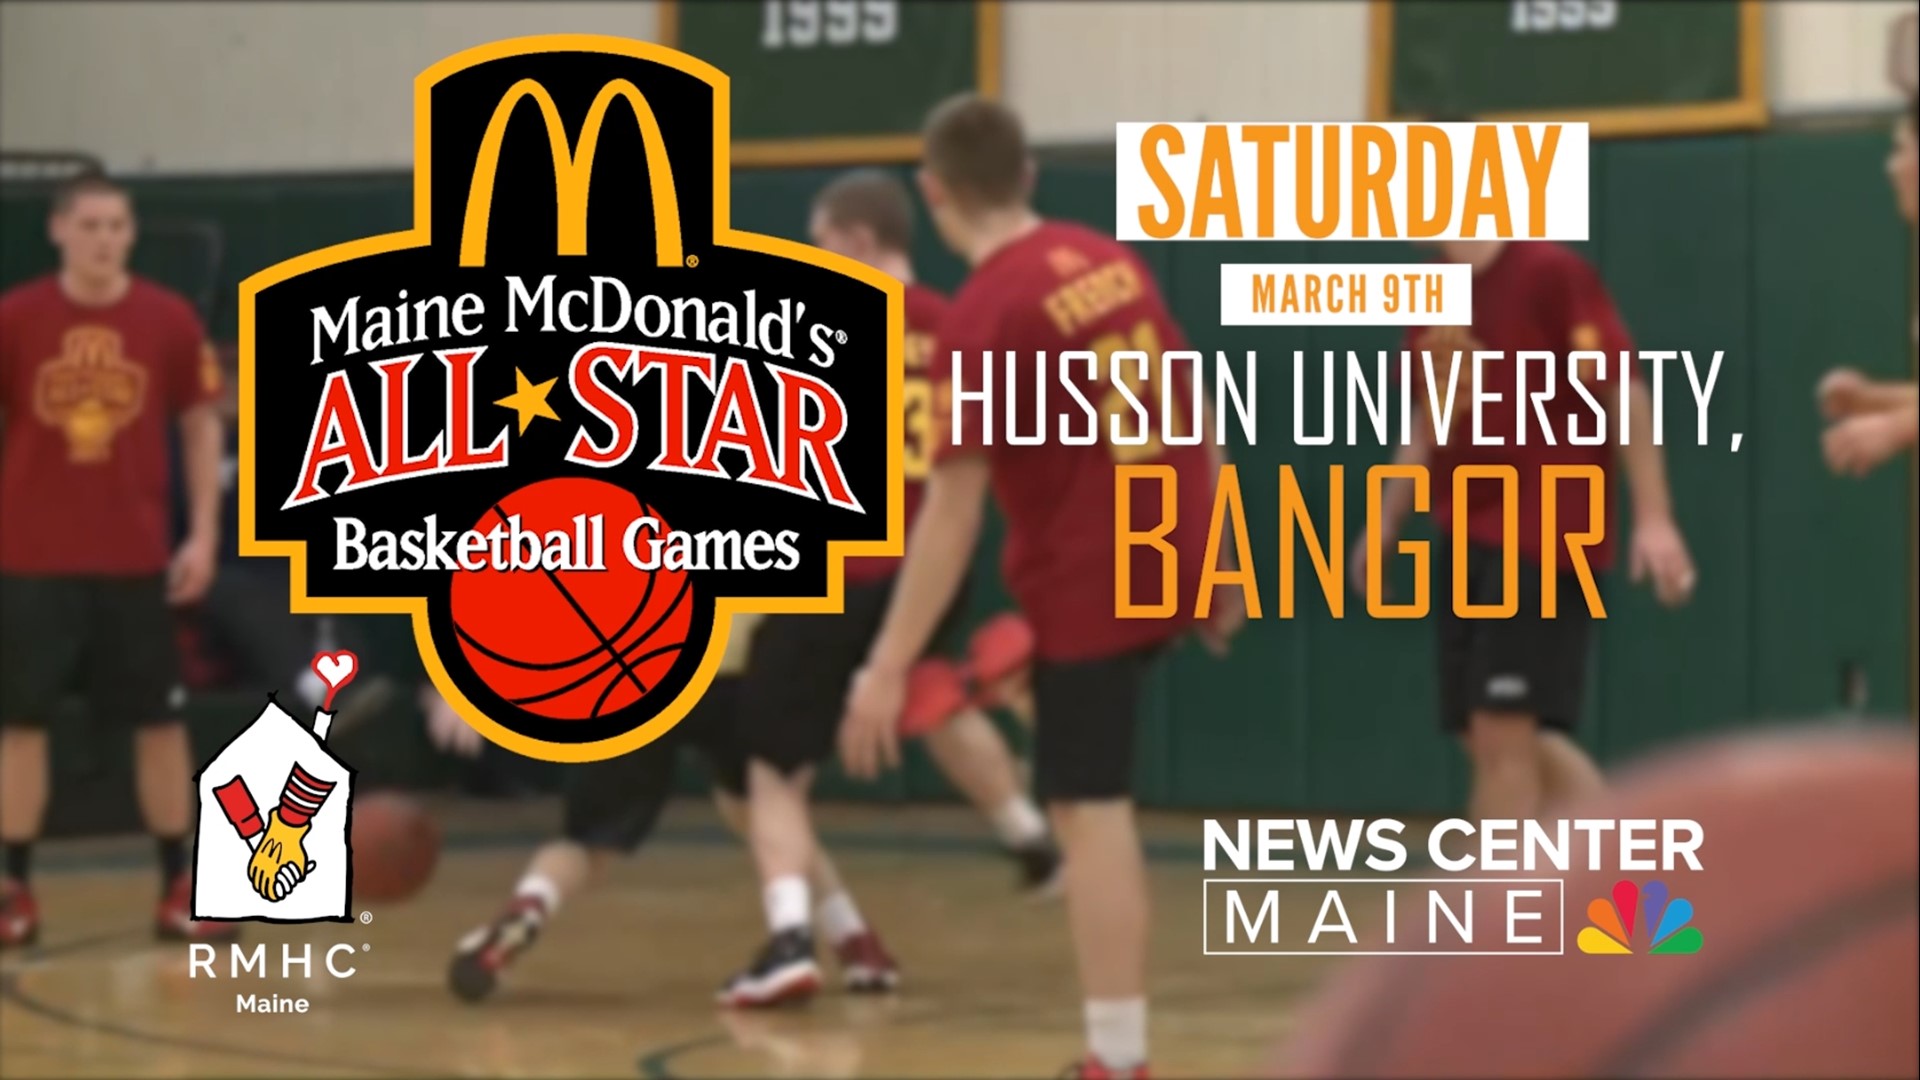 The High School Senior All-Star Games take place on Saturday, March 9 in Bangor. All proceeds benefit the Ronald McDonald House Charities of Maine for children.